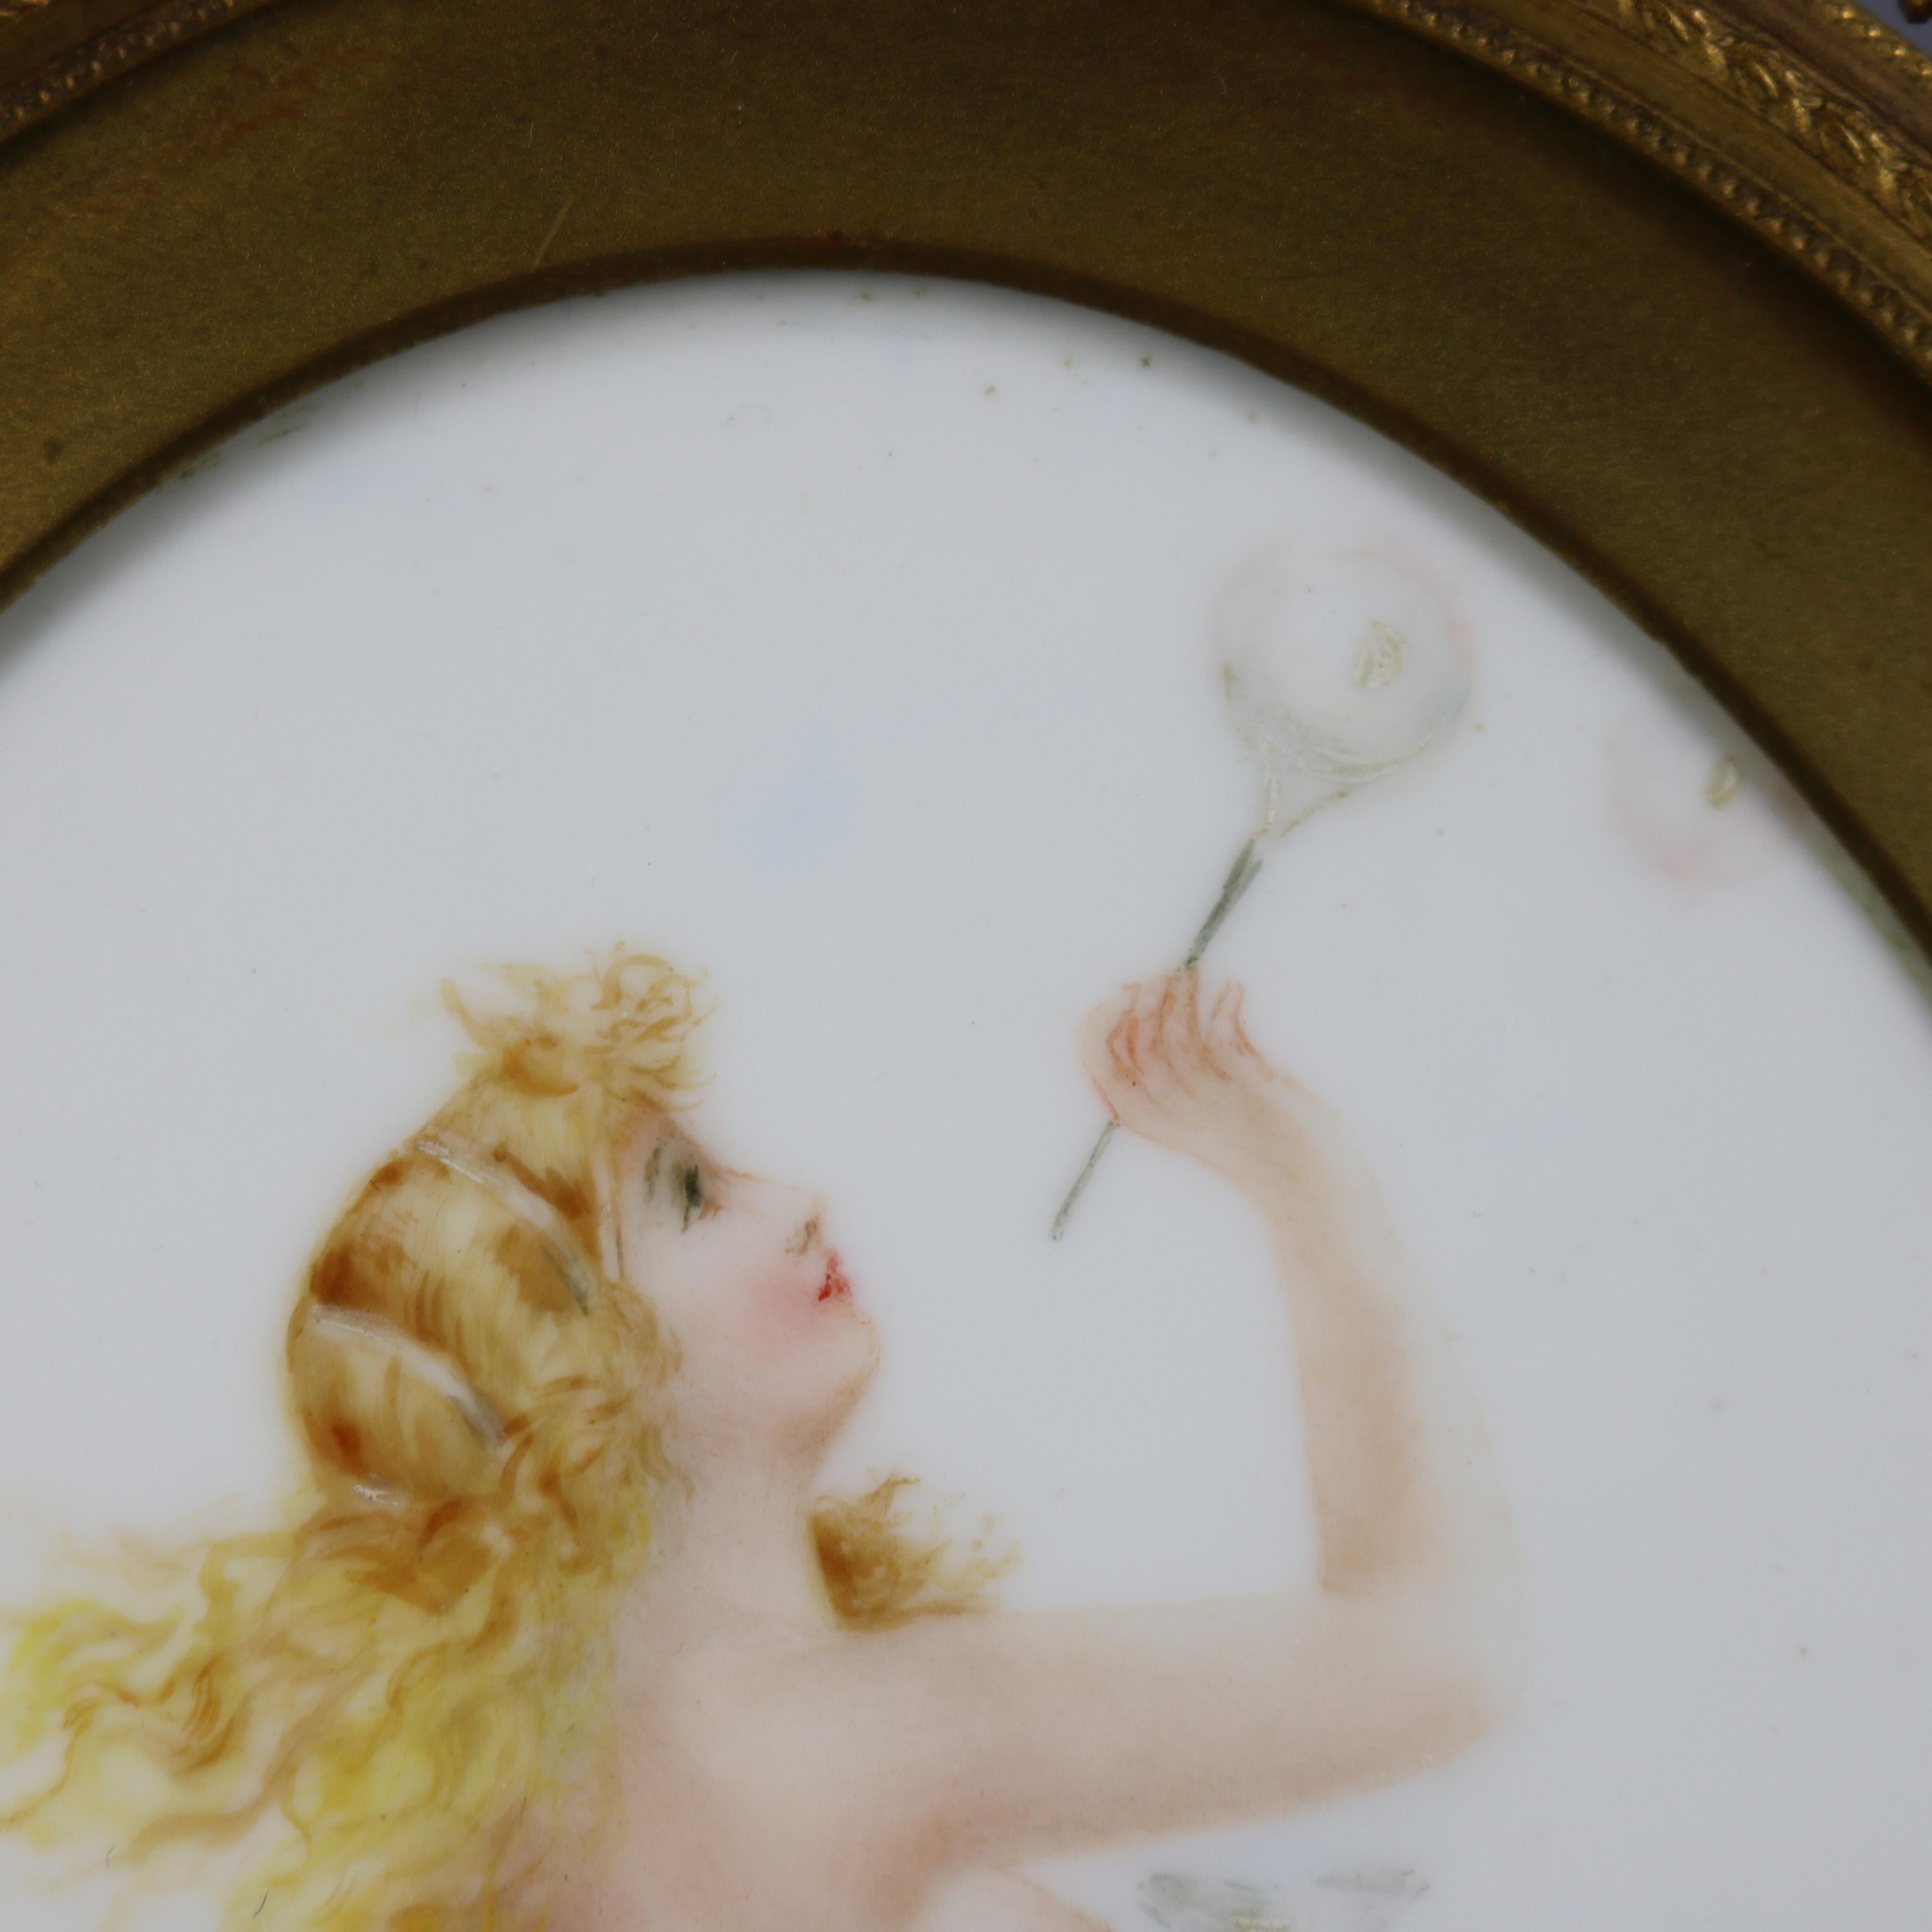 An antique mixed-media painting on porcelain in the manner of KPM depicts partially nude woman in countryside setting blowing bubbles, seated in gilt frame, circa 1890

Measures: 9.75